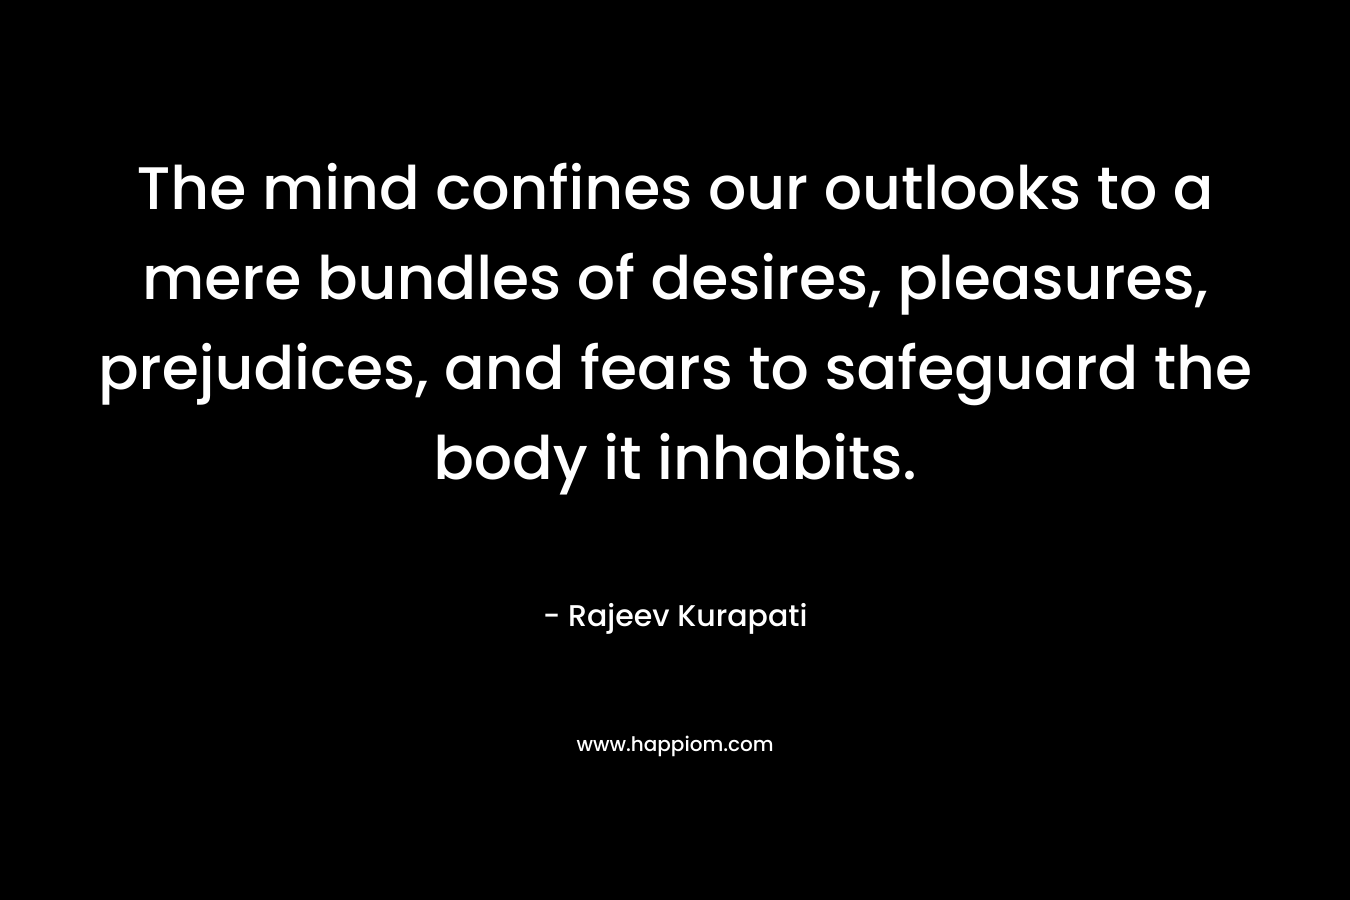 The mind confines our outlooks to a mere bundles of desires, pleasures, prejudices, and fears to safeguard the body it inhabits.